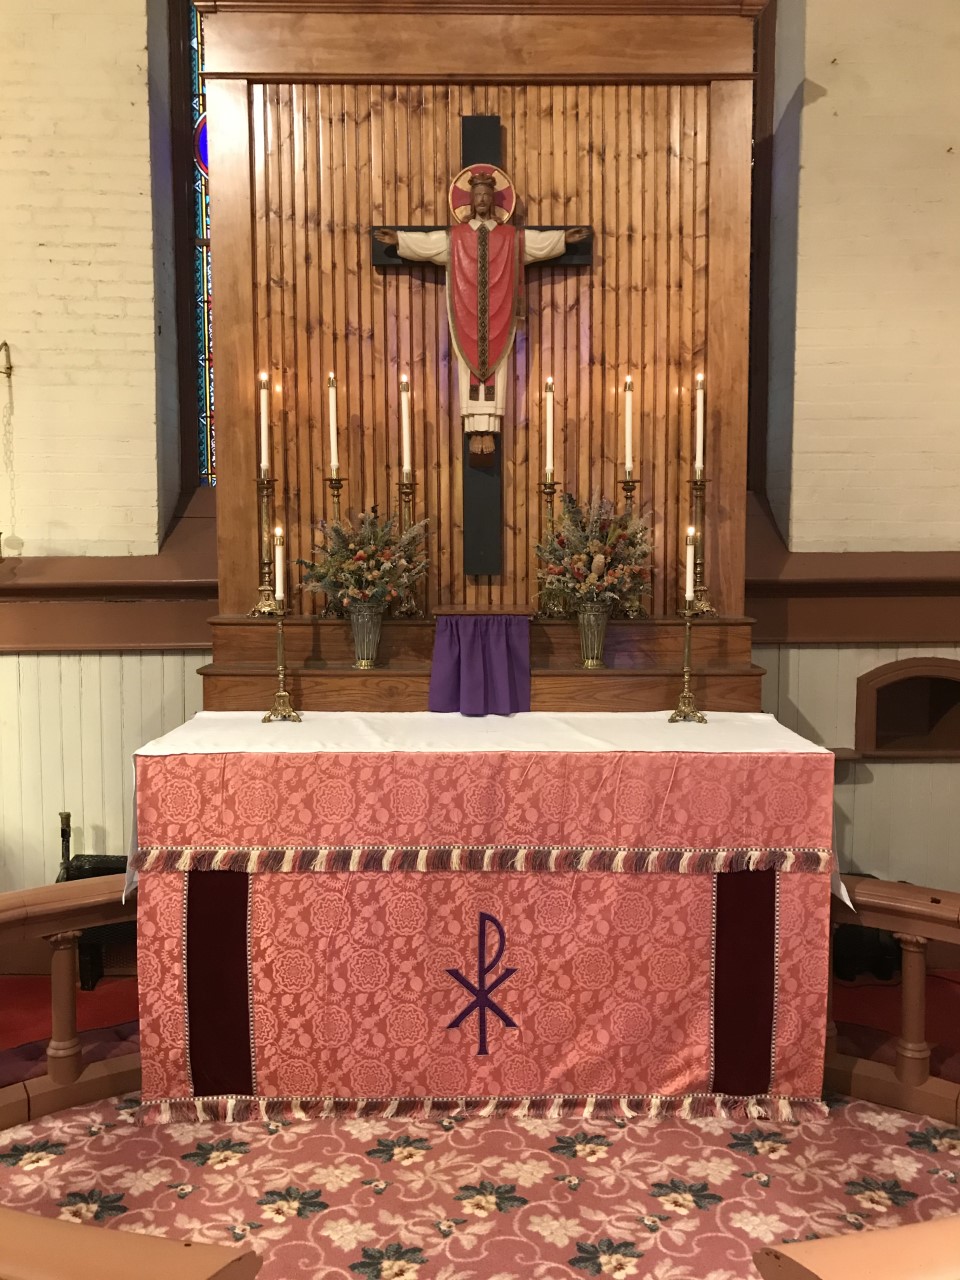 The Altar vested in Rose for Laetare (Mid-Lent) Sunday